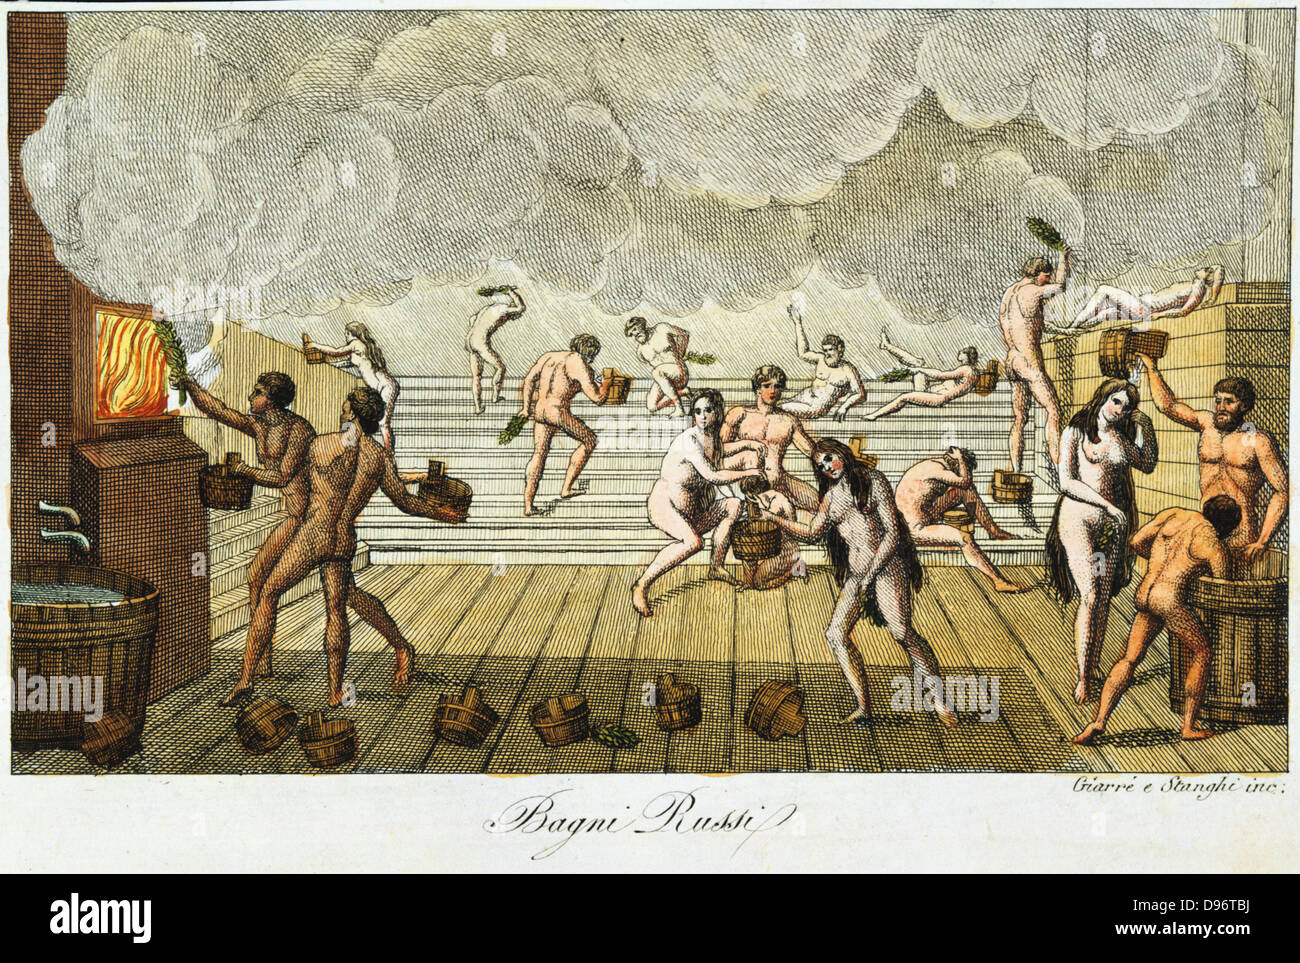 Sauna (Russian) bath. From an early 19th century hand-coloured copperplate print. Stock Photo